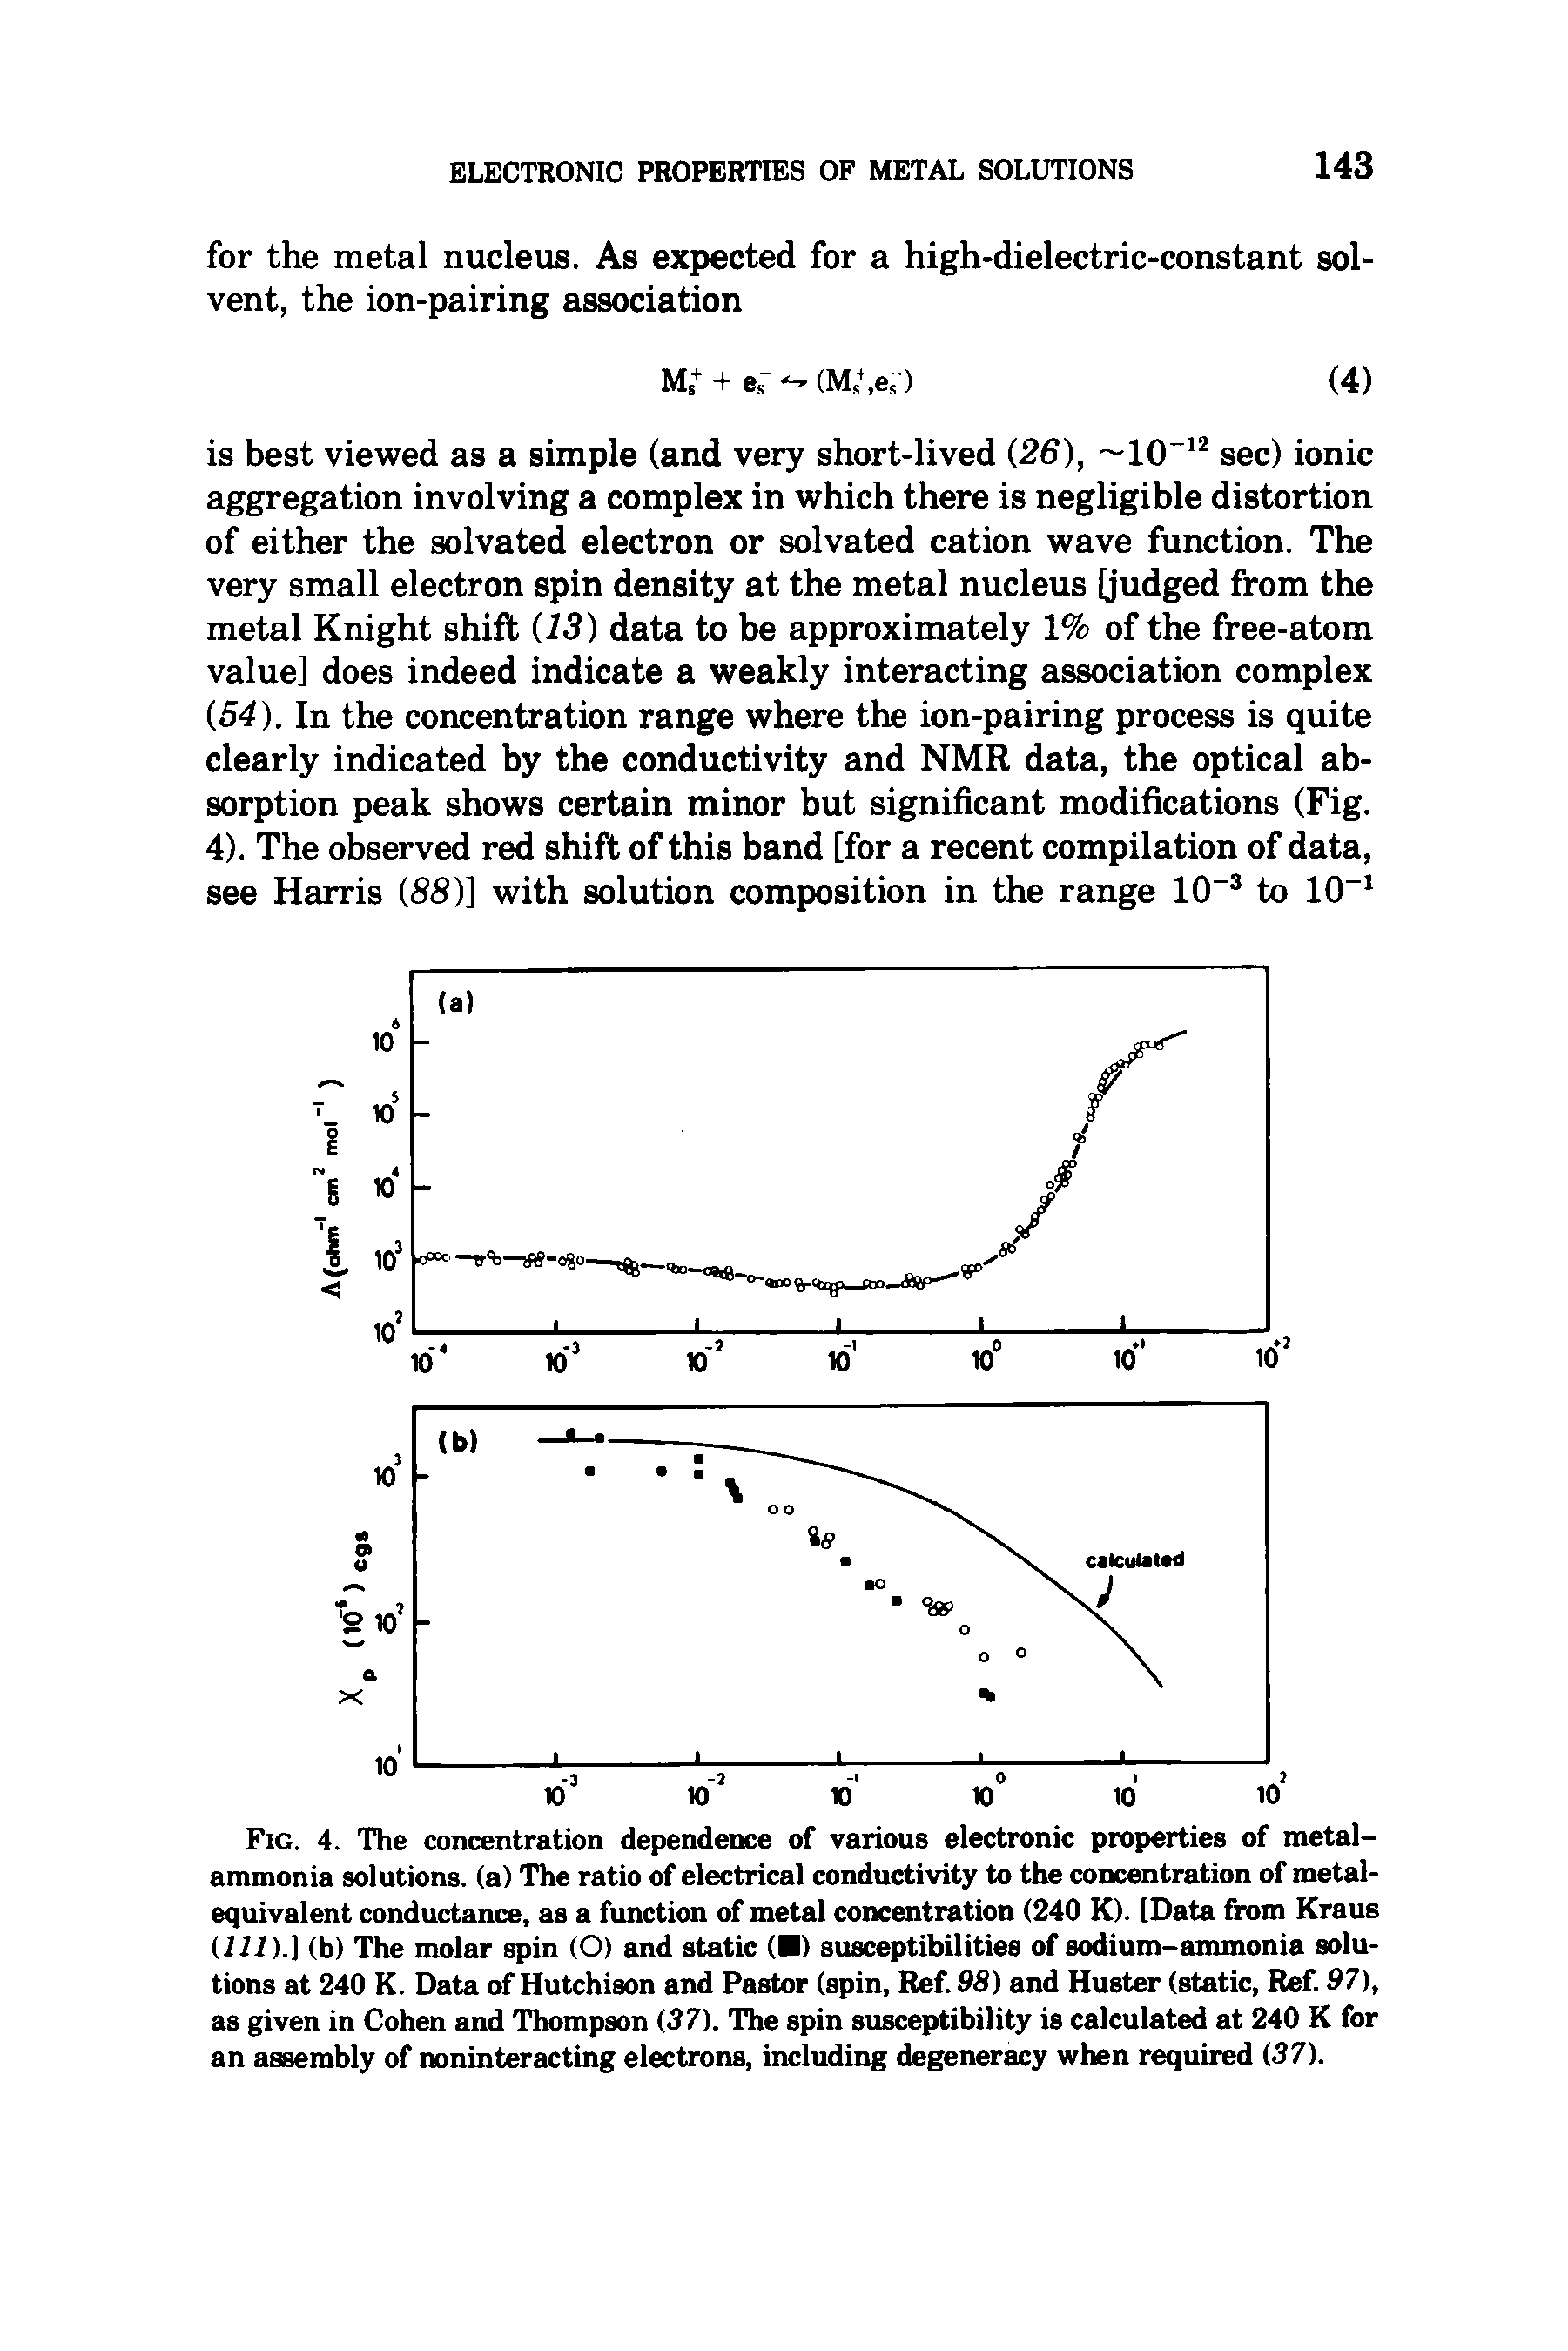 Fig. 4. The concentration dependence of various electronic properties of metal-ammonia solutions, (a) The ratio of electrical conductivity to the concentration of metal-equivalent conductance, as a function of metal concentration (240 K). [Data from Kraus (111).] (b) The molar spin (O) and static ( ) susceptibilities of sodium-ammonia solutions at 240 K. Data of Hutchison and Pastor (spin, Ref. 98) and Huster (static, Ref. 97), as given in Cohen and Thompson (37). The spin susceptibility is calculated at 240 K for an assembly of noninteracting electrons, including degeneracy when required (37).